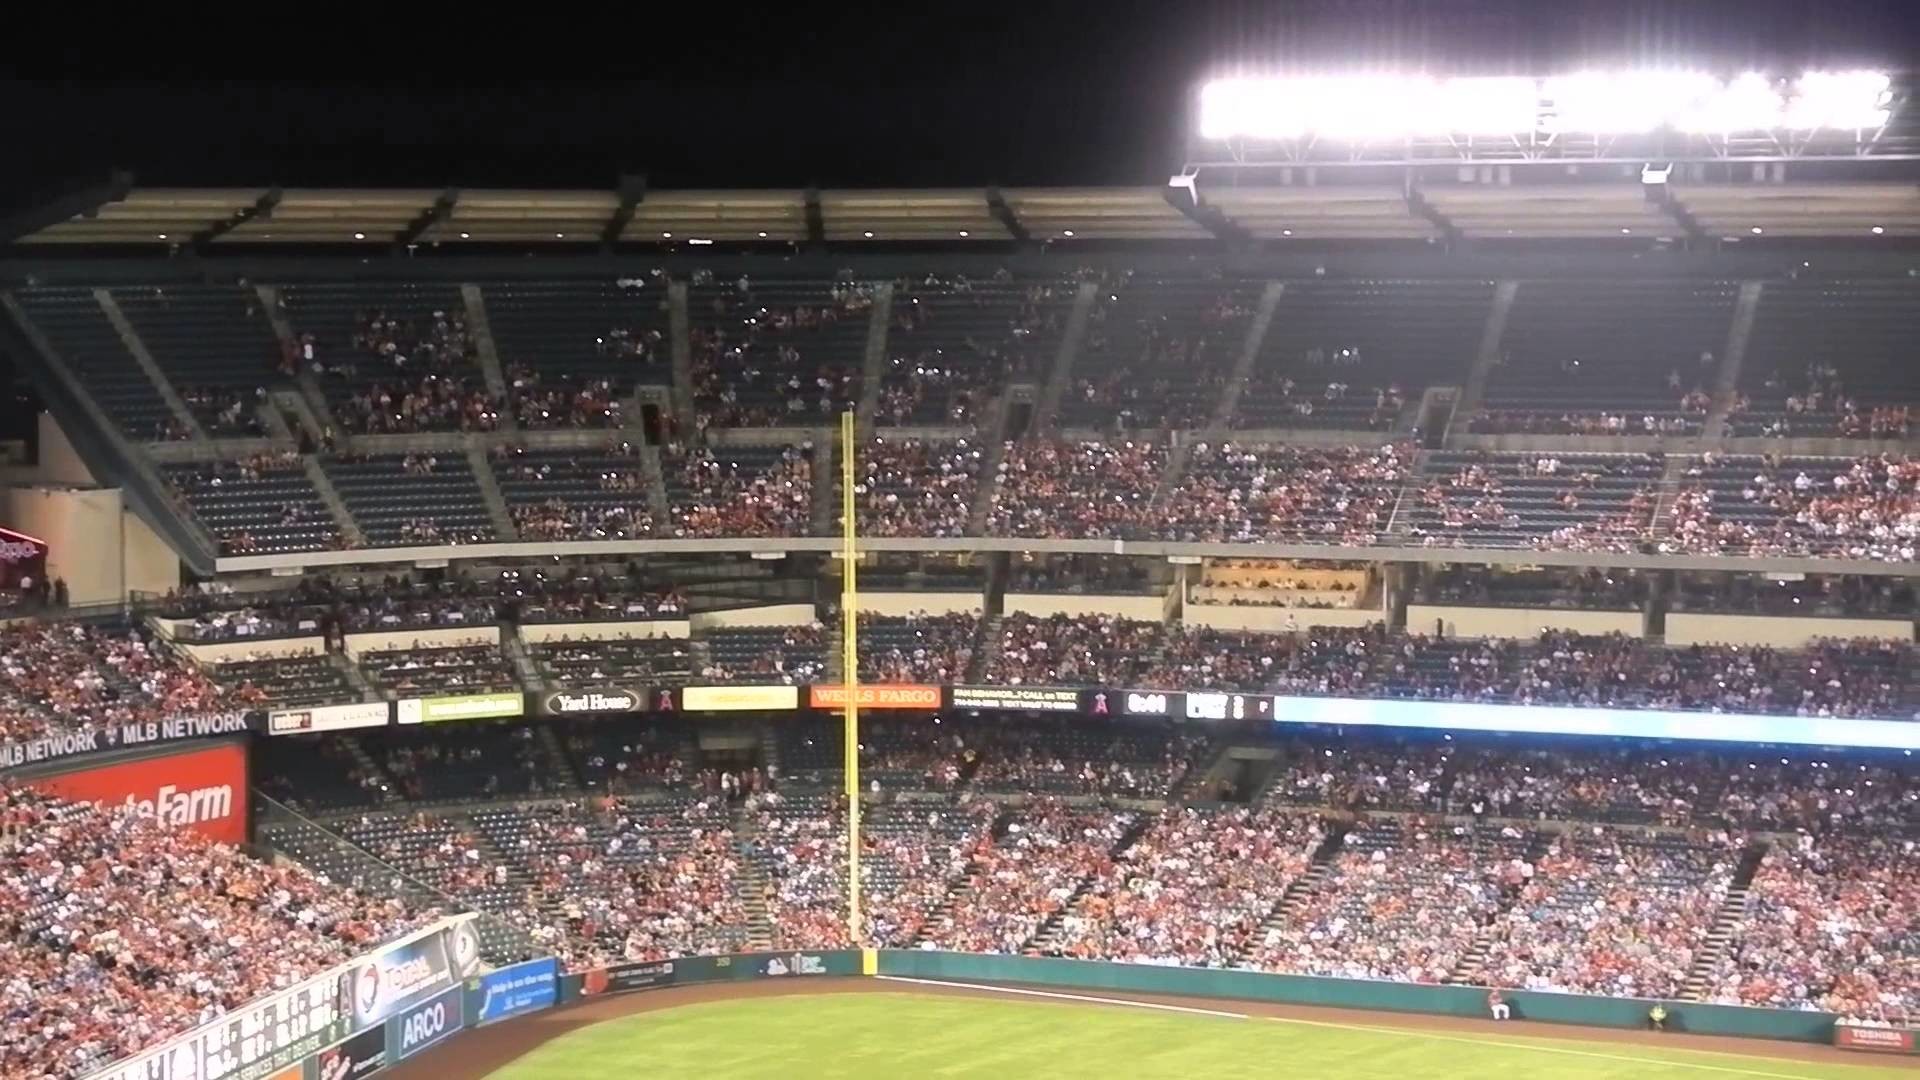 Rally Lights Cell Phone Lights Flashing – Top of the 6th at Angels Game